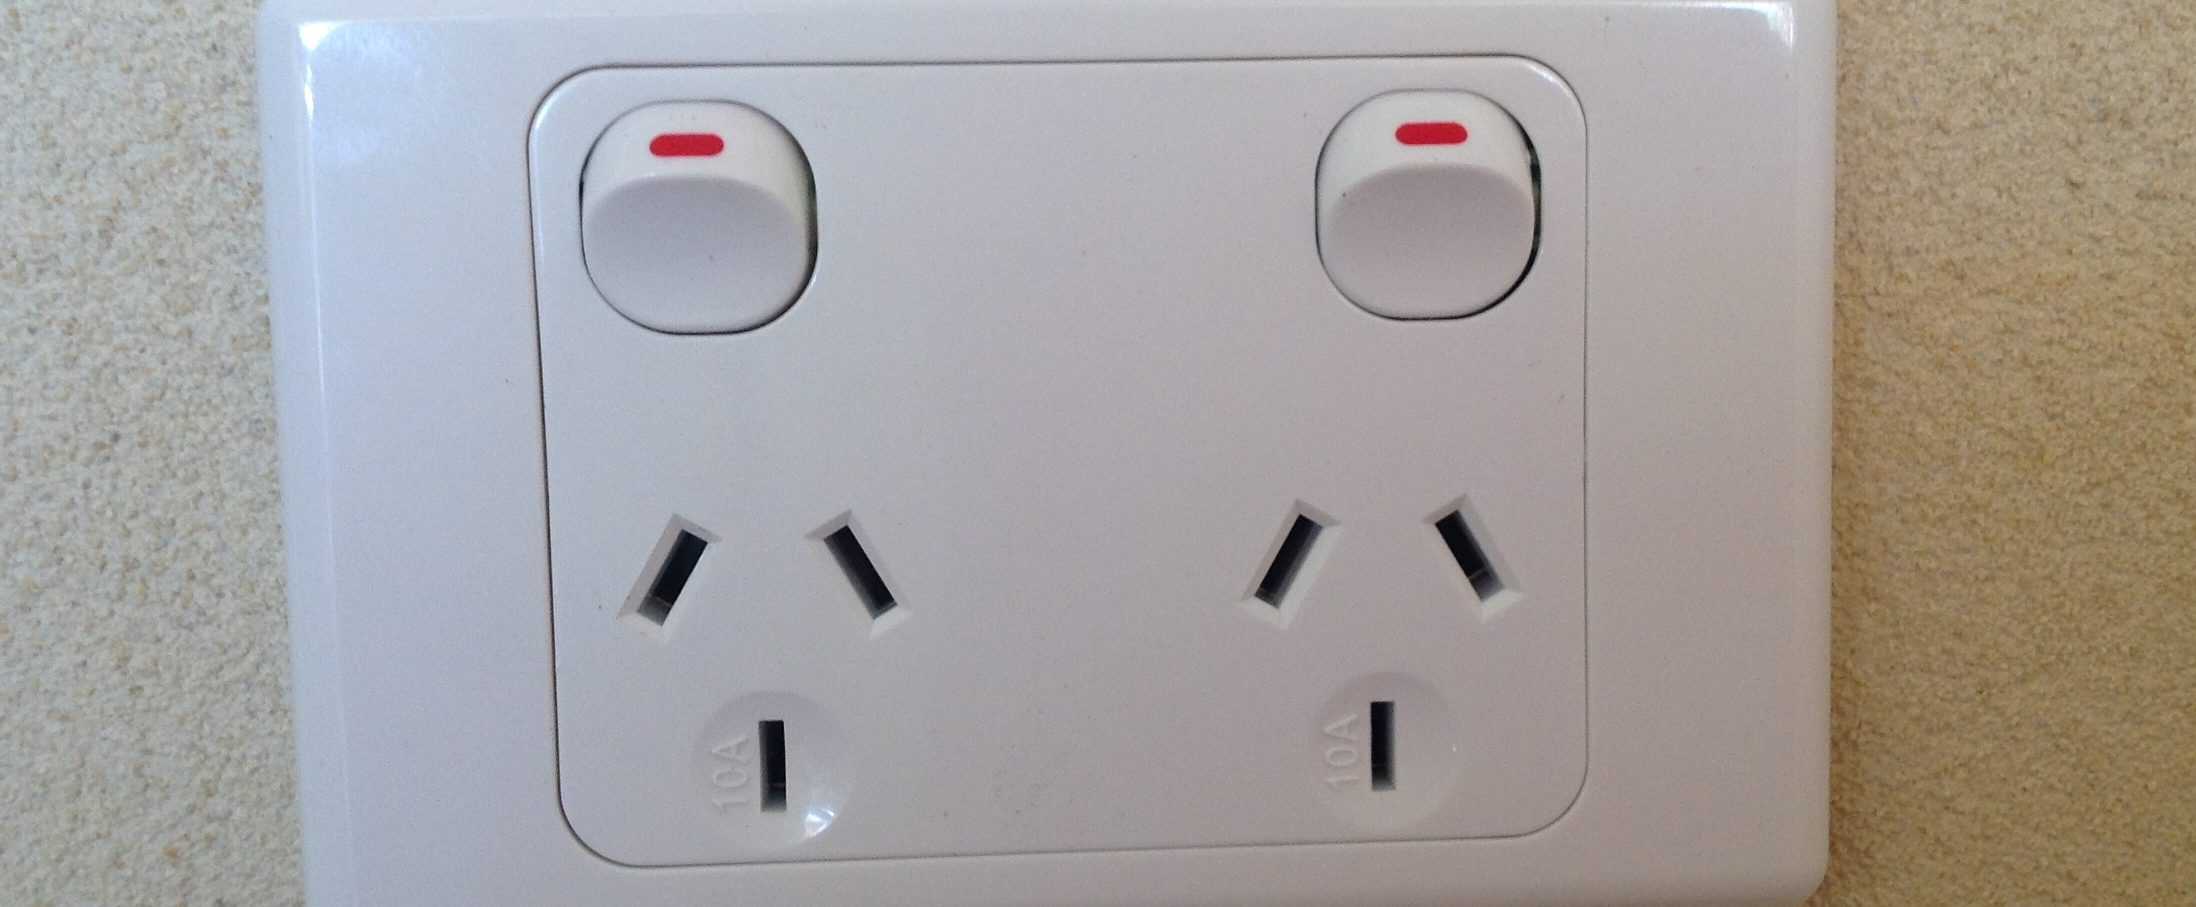 power points installed by an electrician